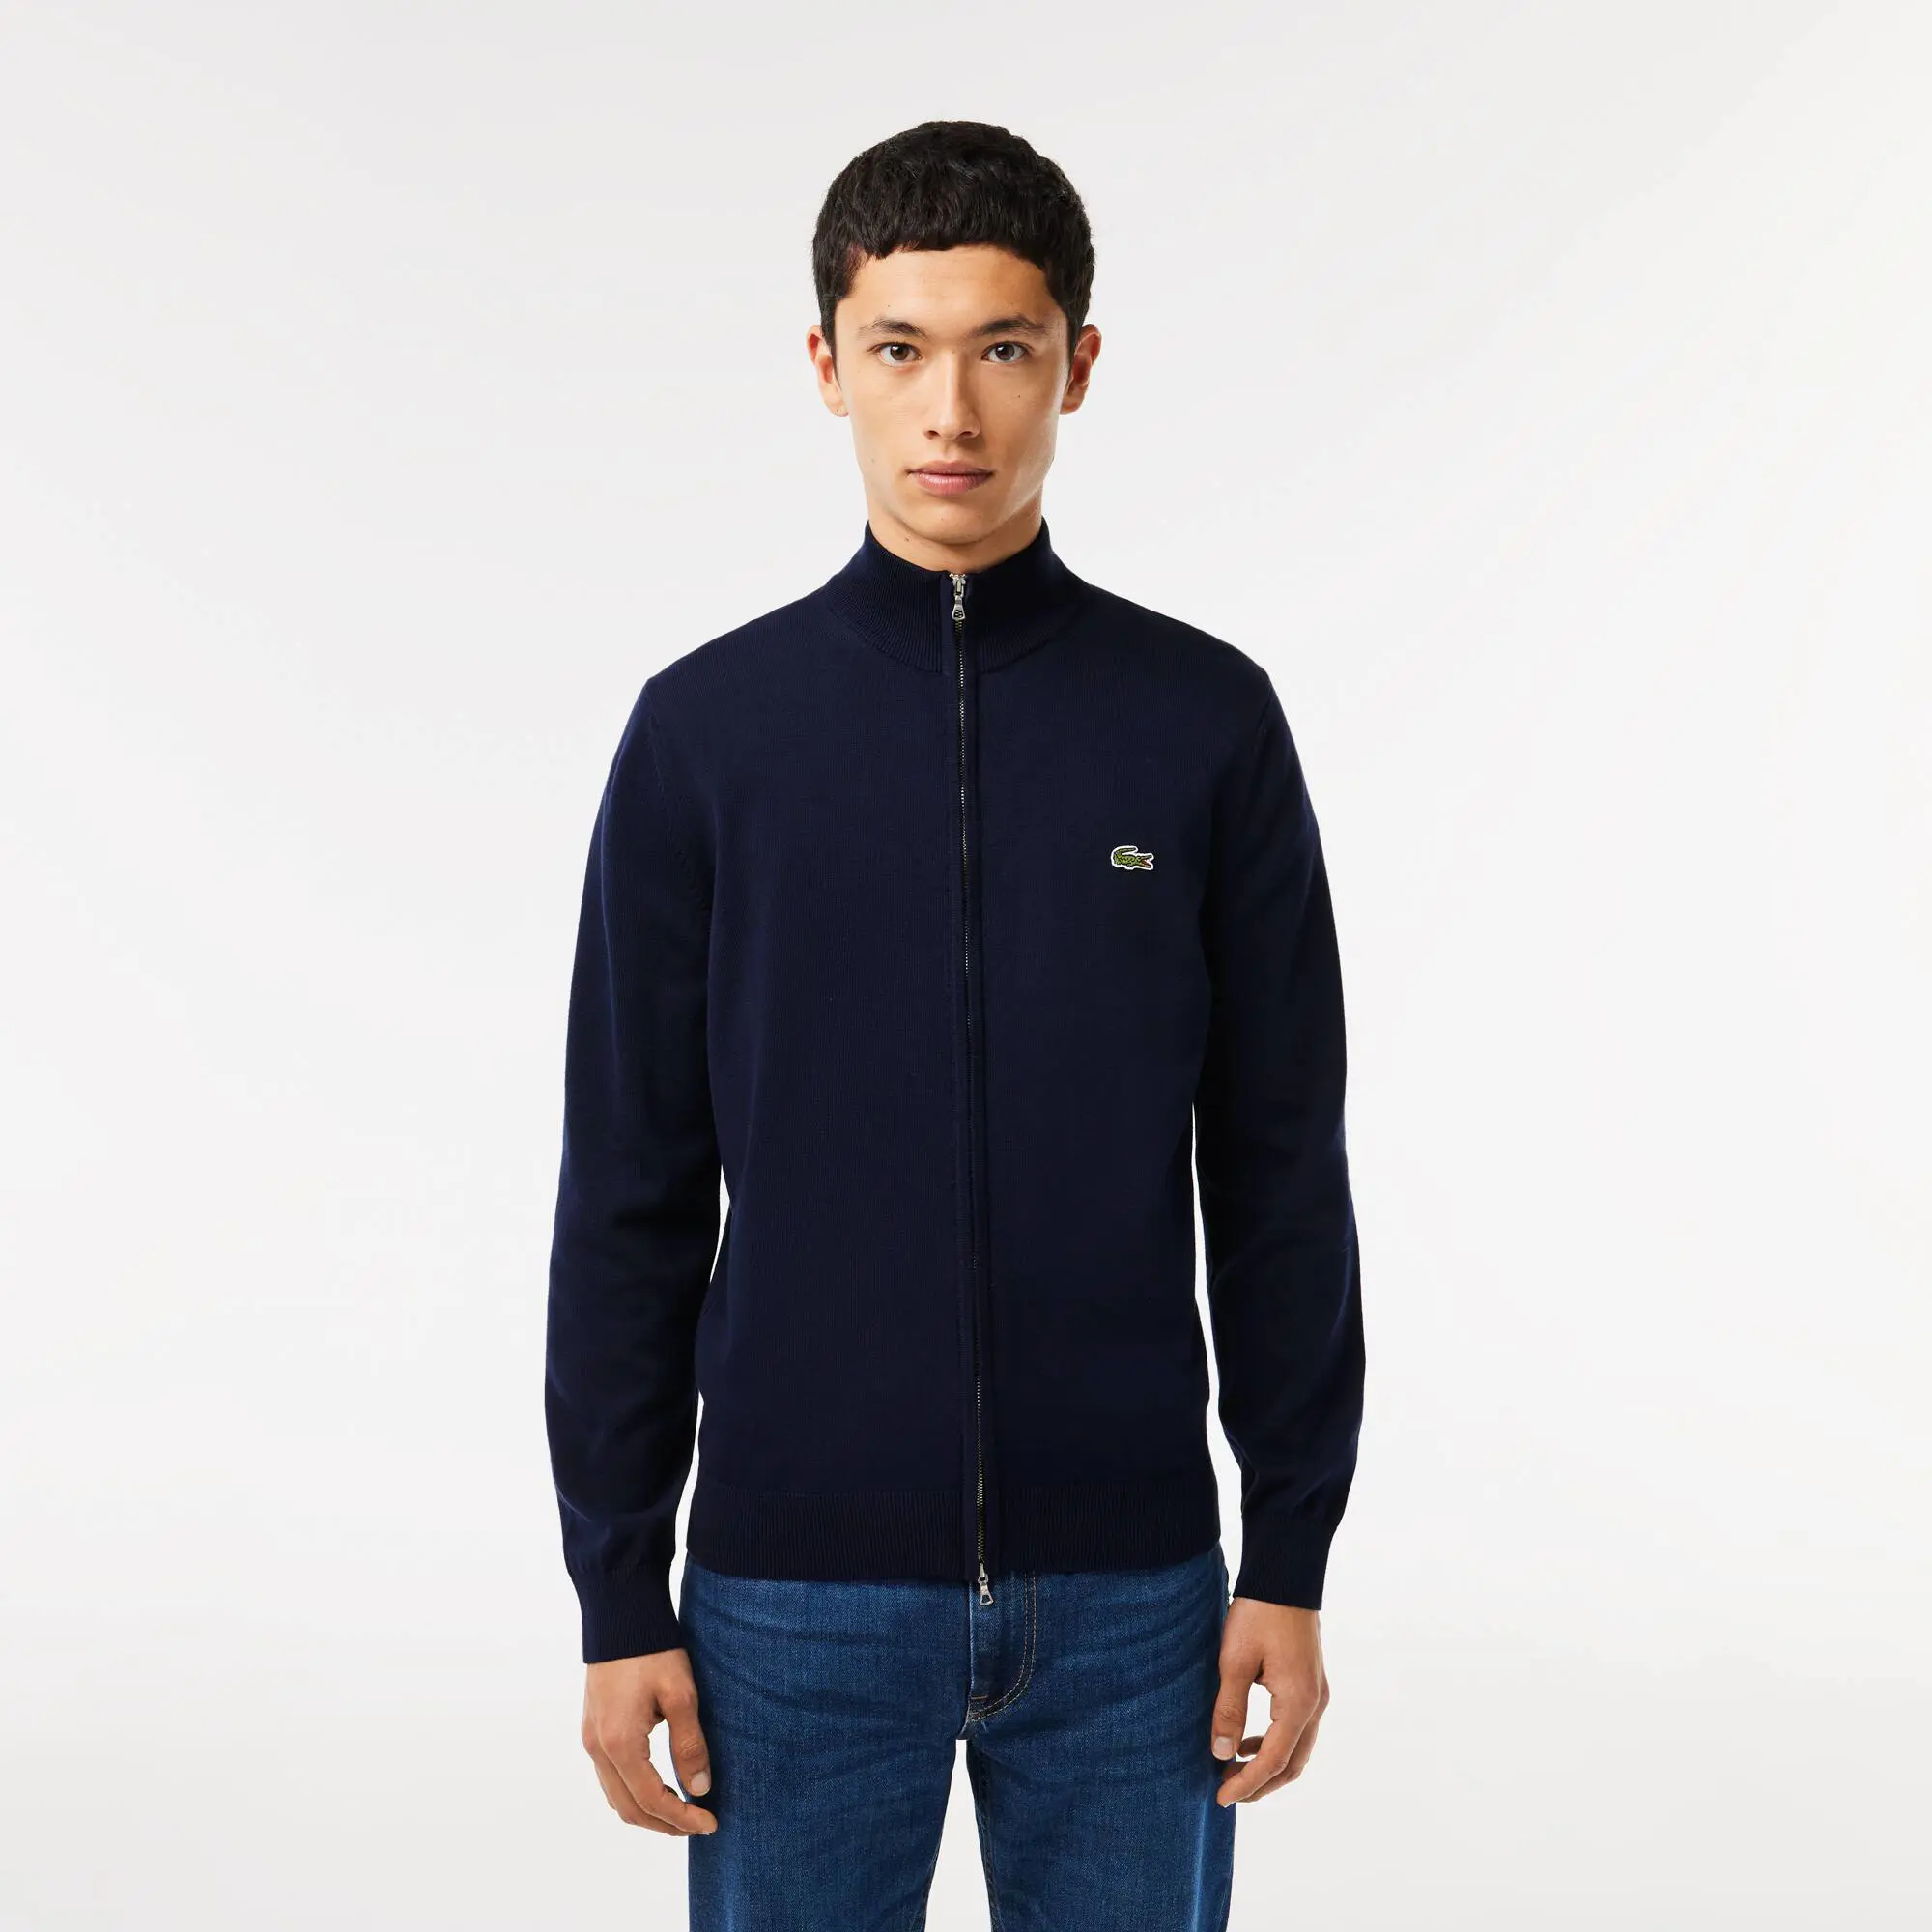 Lacoste Men's Stand-up Collar Organic Cotton Zippered Sweater. 1